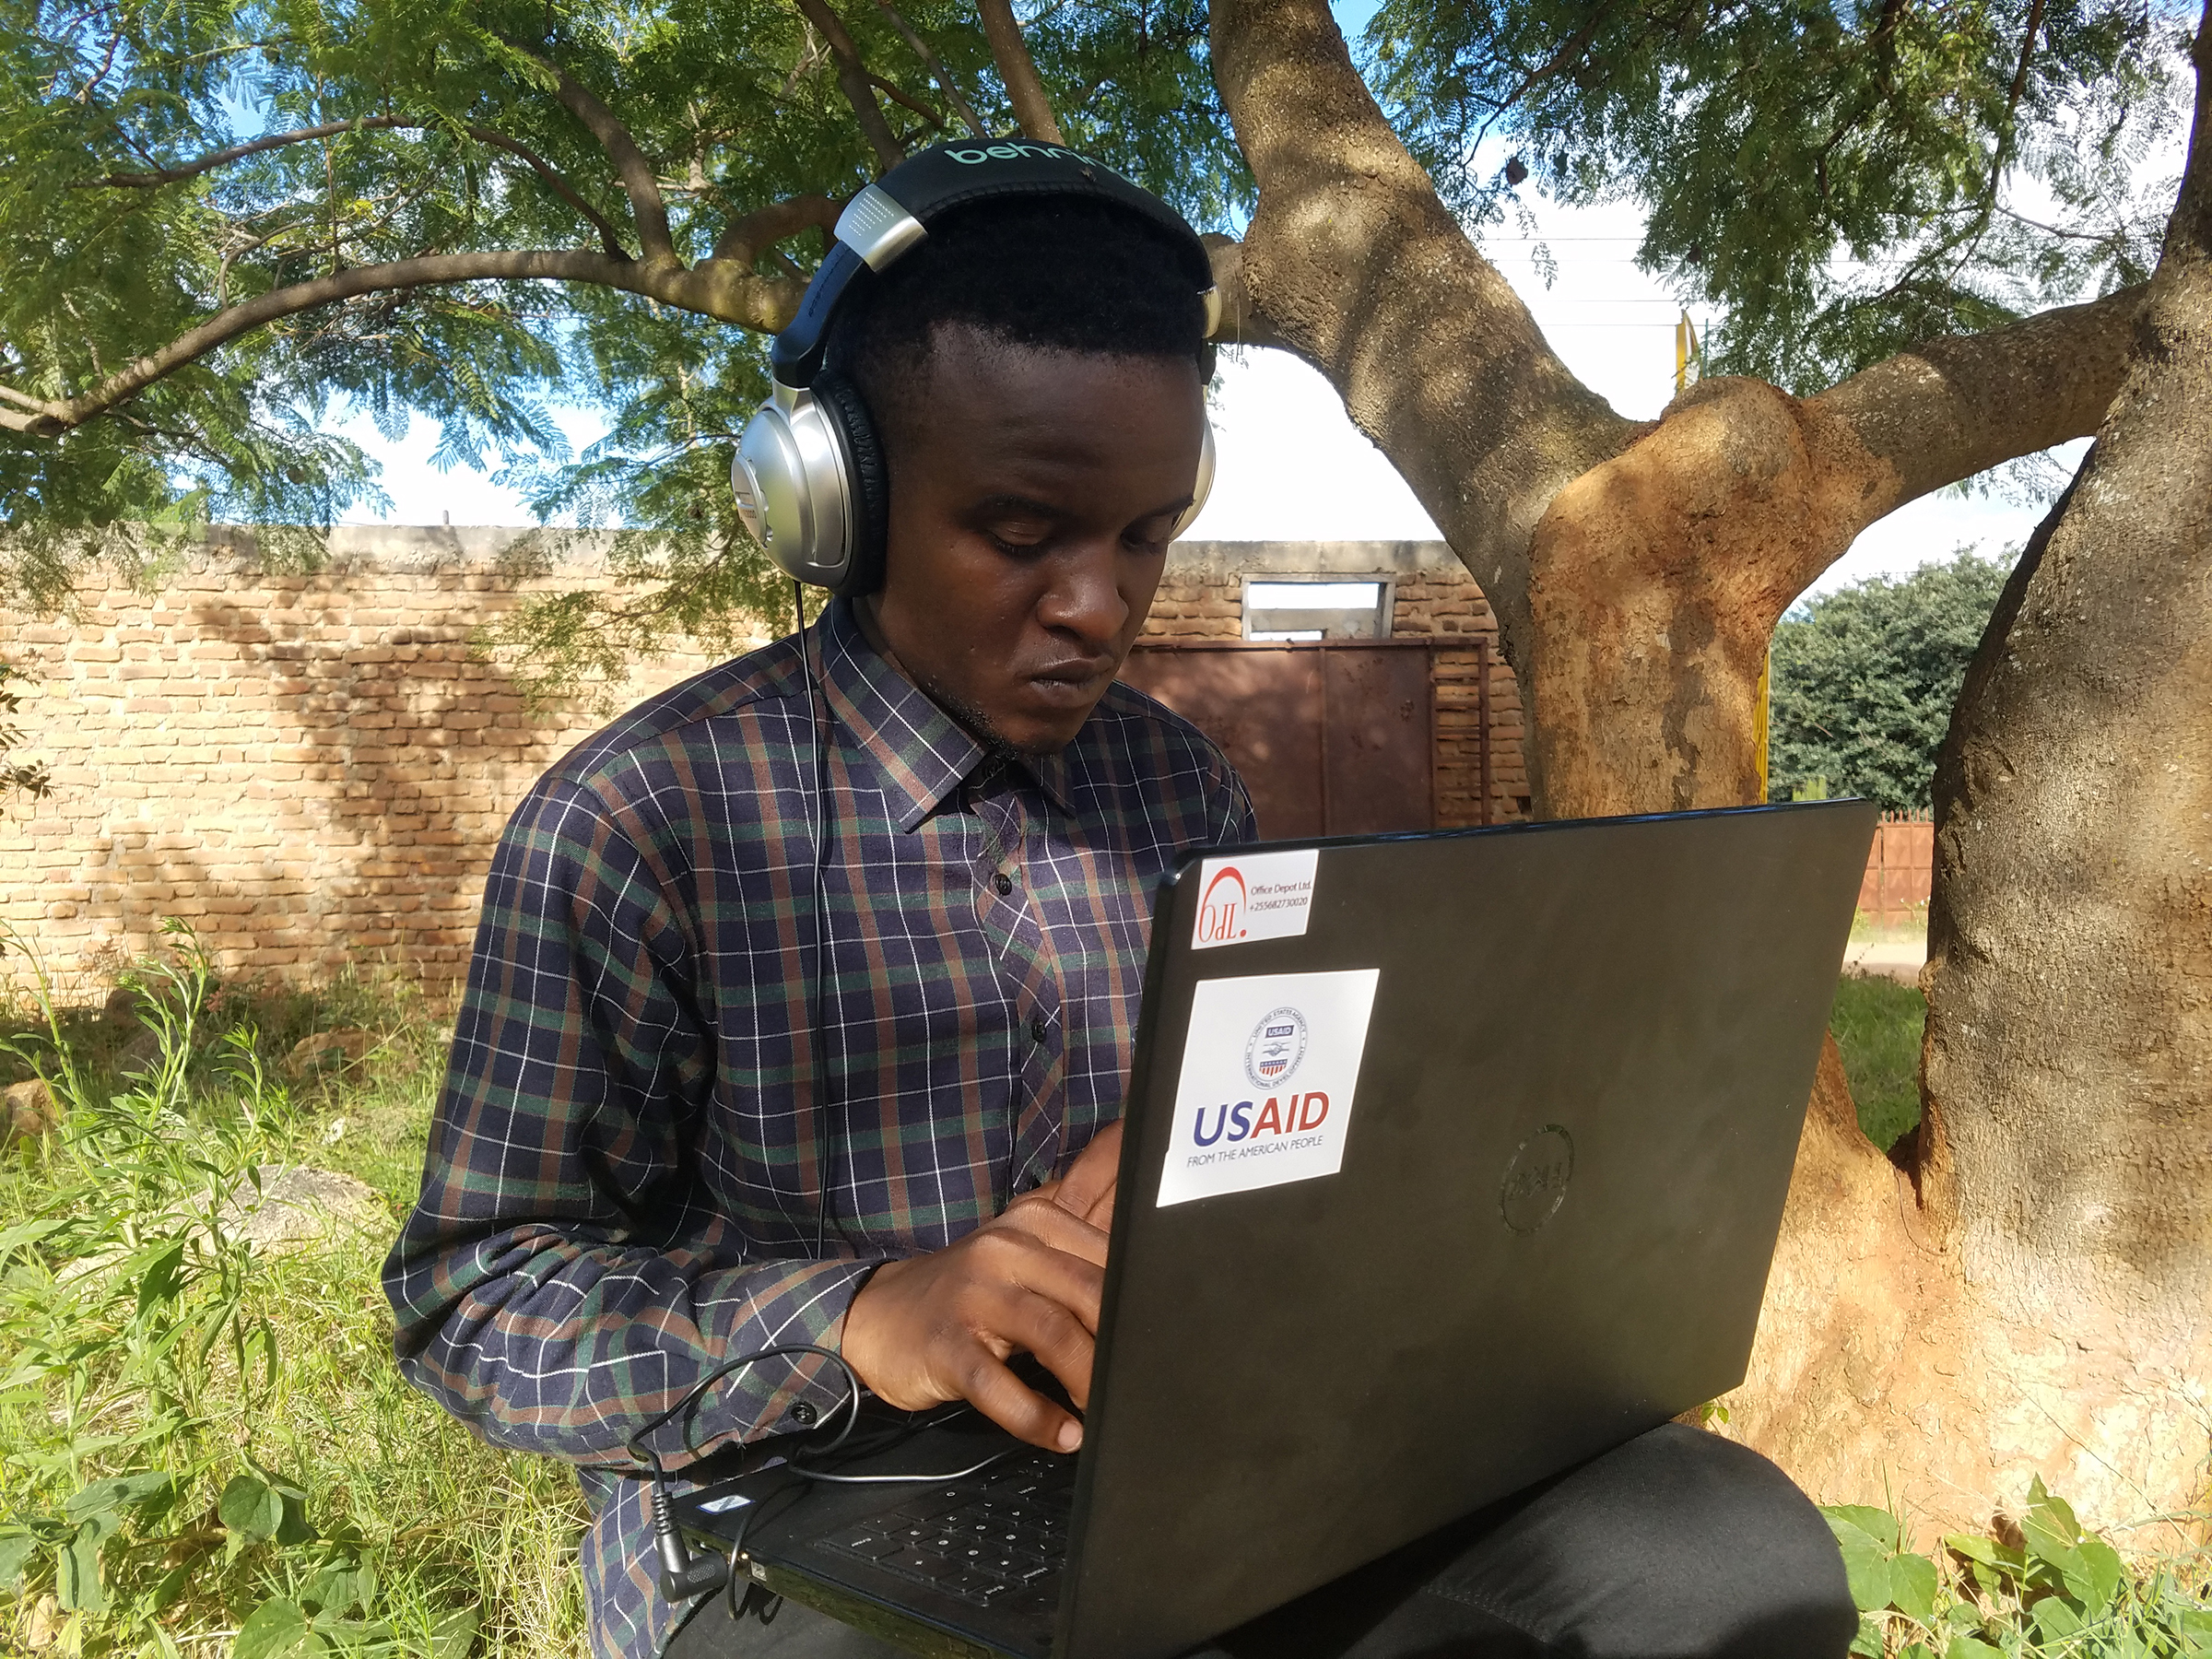 A man wearing headphones works on a laptop computer